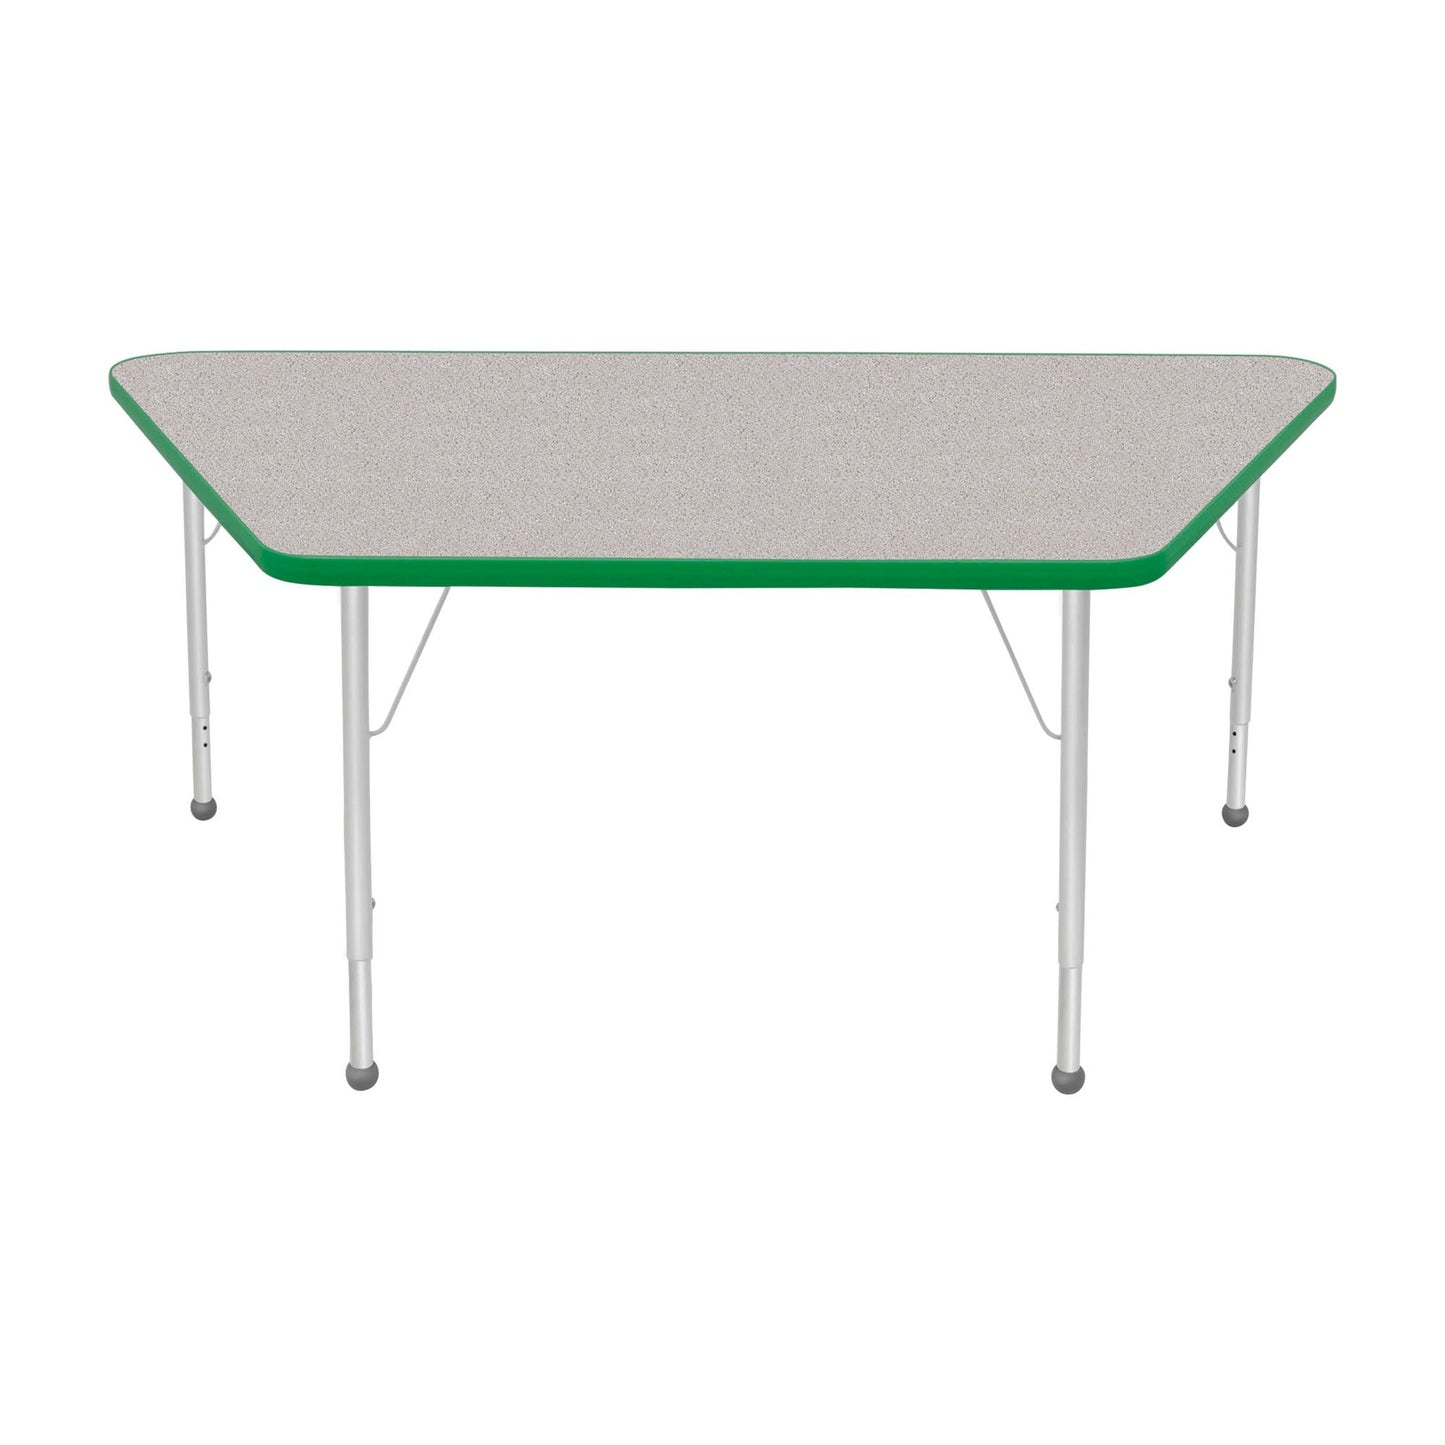 Mahar Creative Colors Large Trapezoid Creative Colors Activity Table with Heavy Duty Laminate Top (30"W x 60"L x 22-30"H) - SchoolOutlet